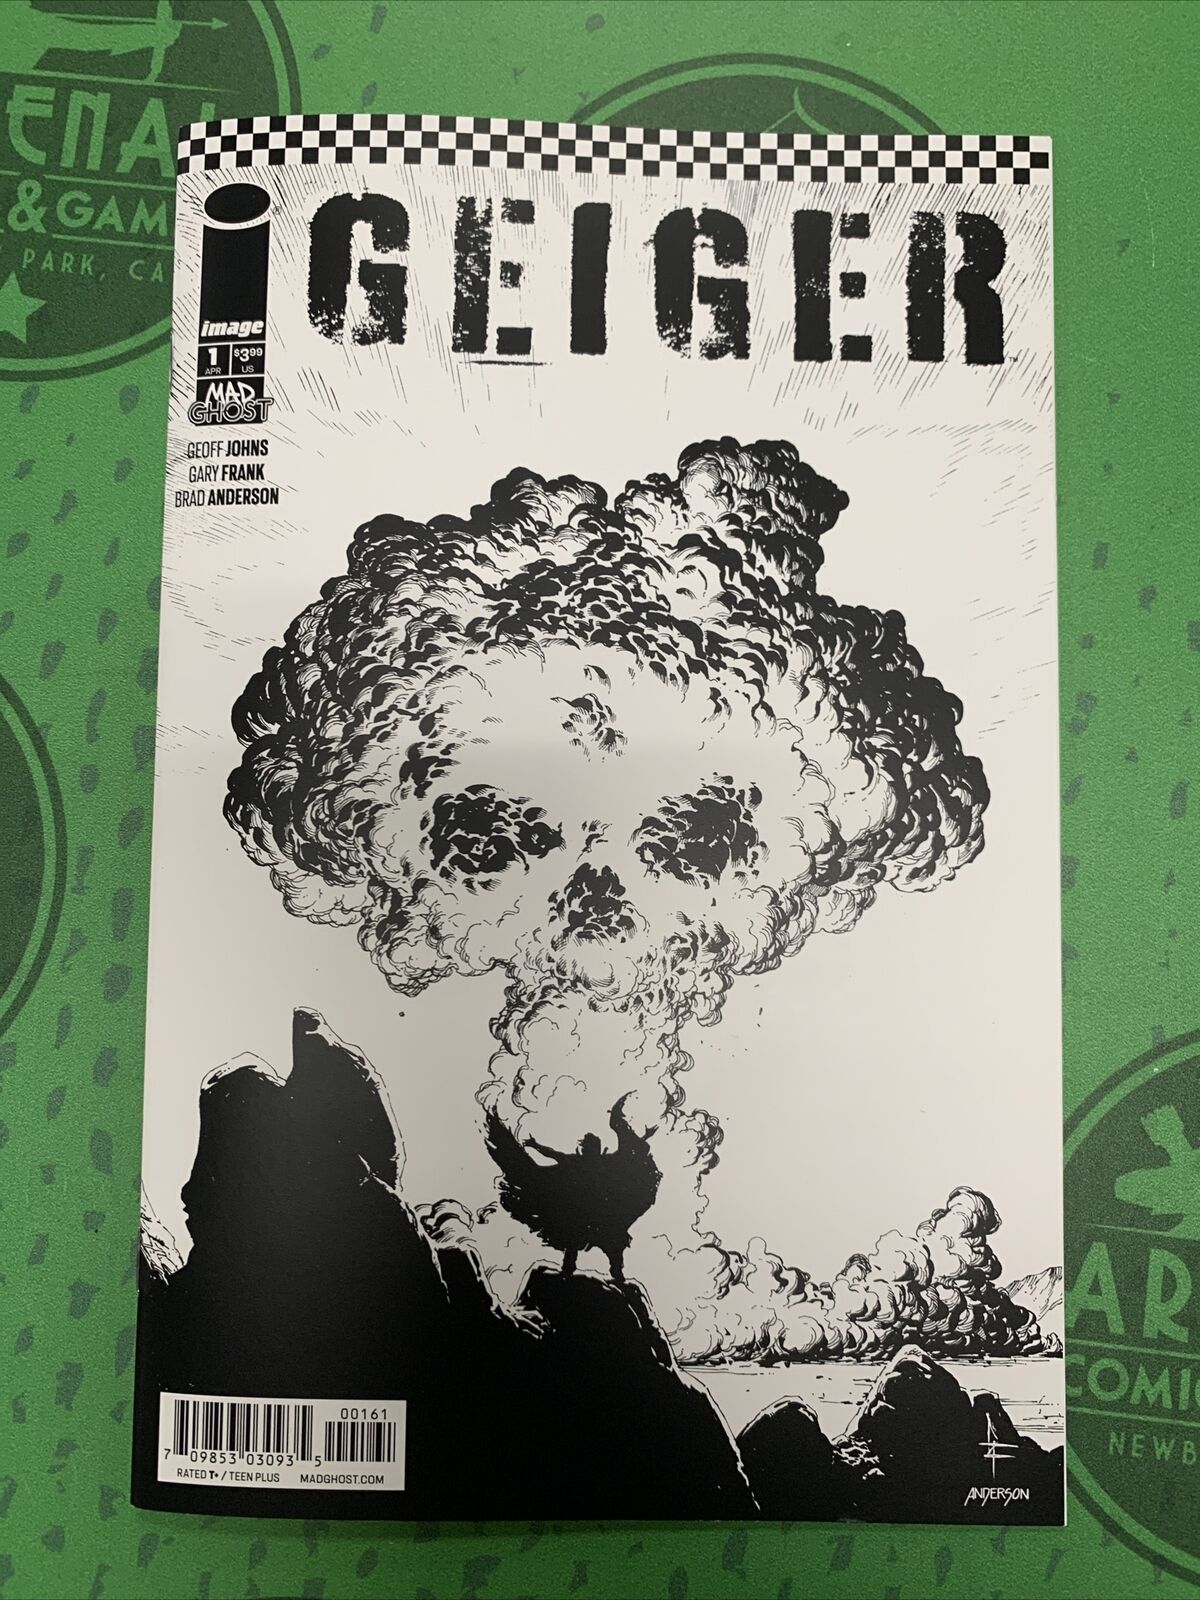 Geiger #1 Black and White Thank You Variant Image NM